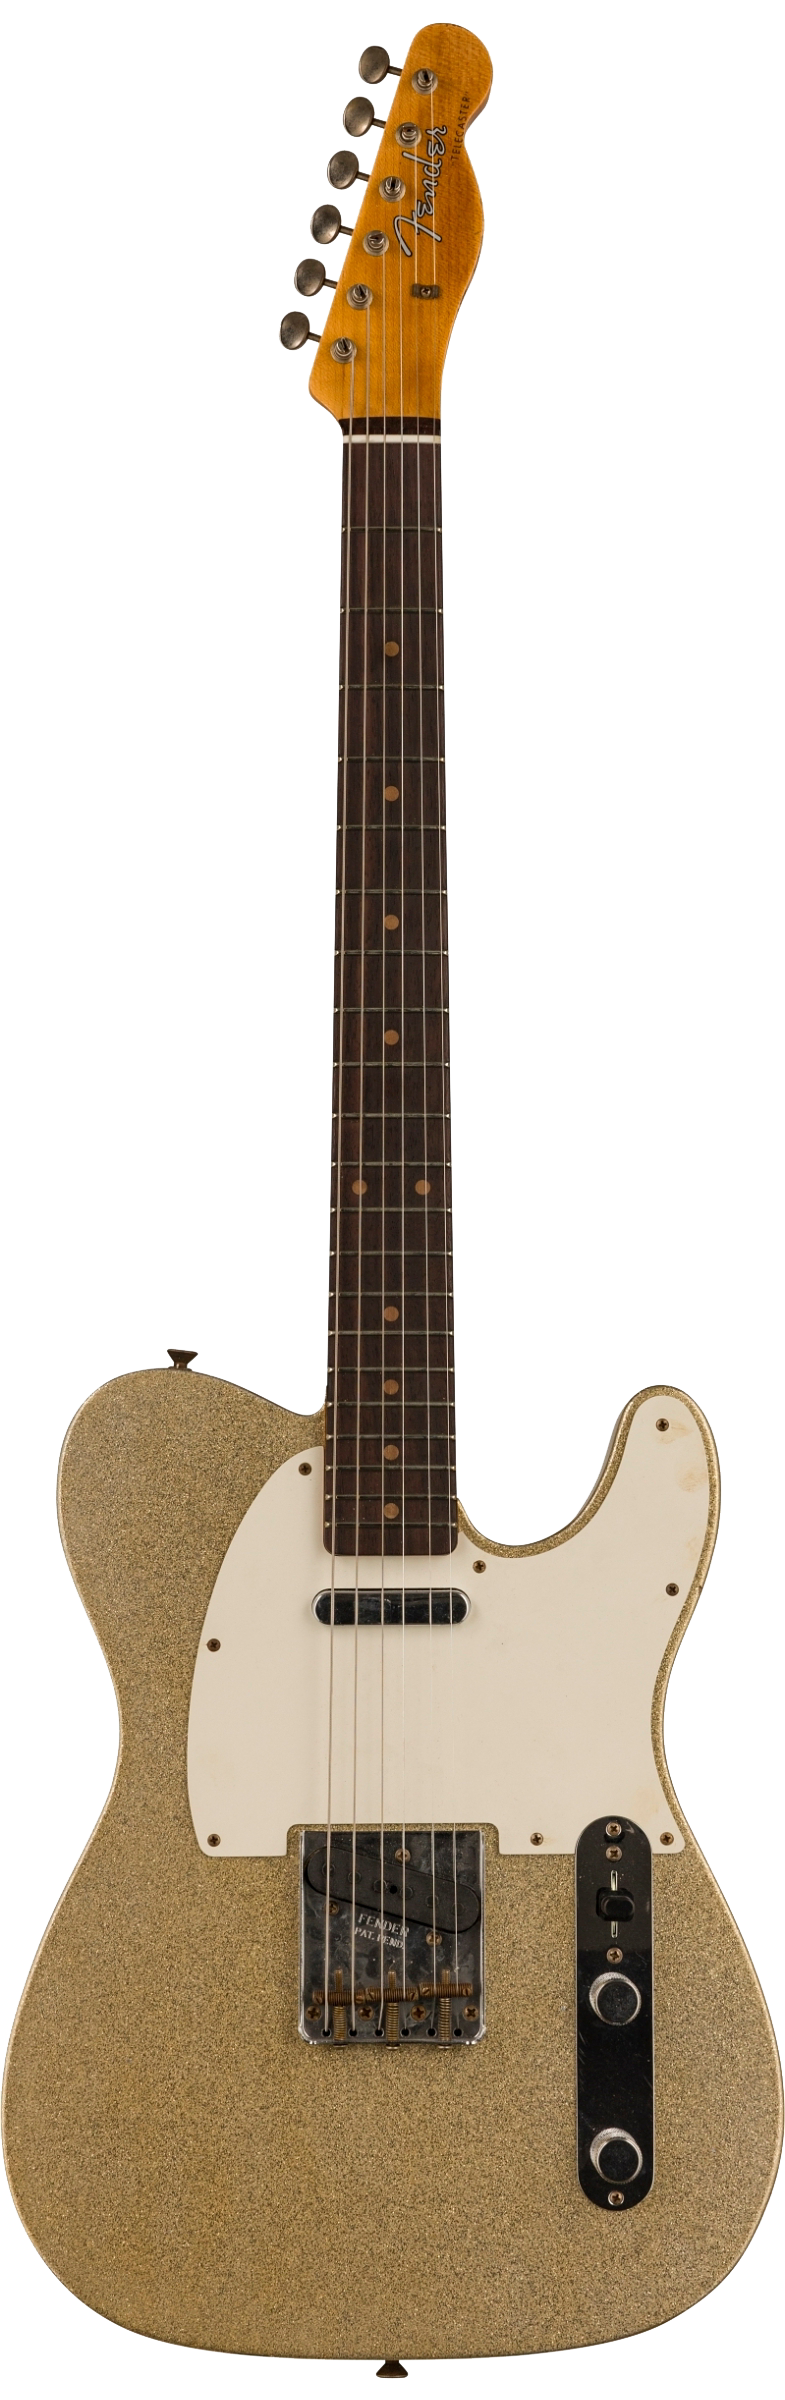 Full front shot of Fender Custom Shop Limited Edition '60 Tele Journeyman Relic Aged Silver Sparkle.